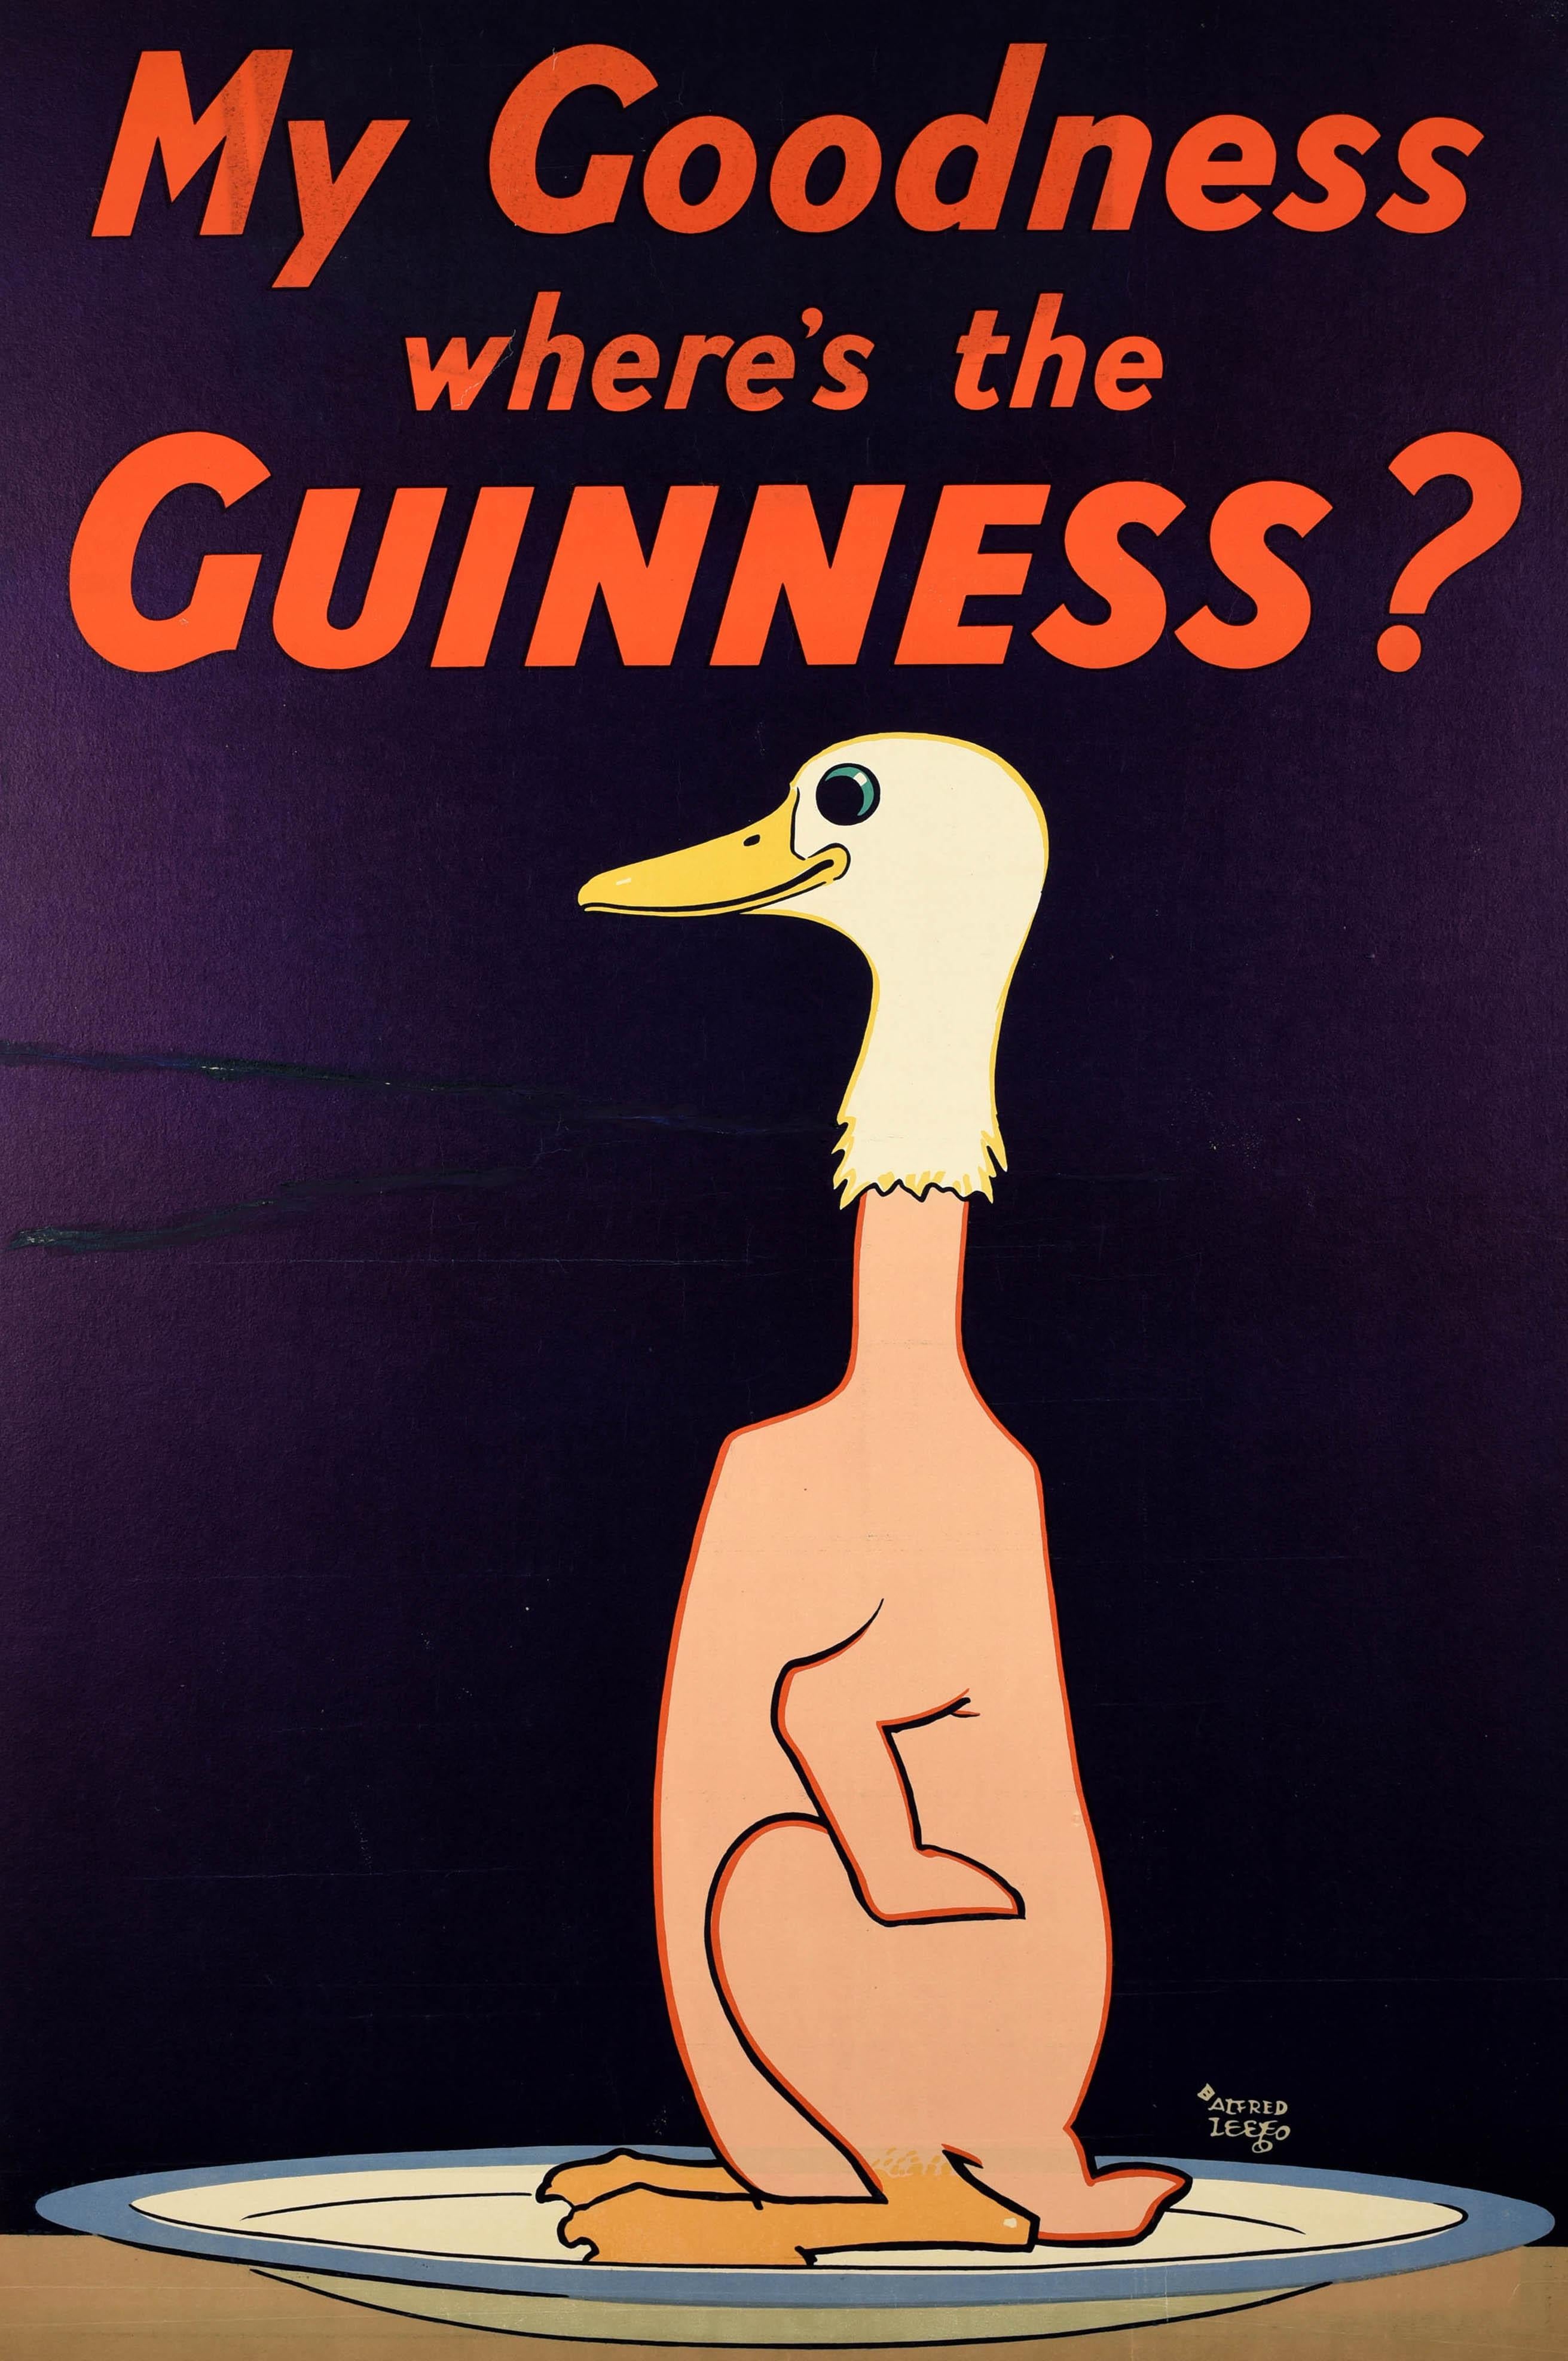 Rare original vintage Guinness poster - My Goodness where's the Guinness? - featuring fun artwork by the British graphic designer Alfred Ambrose Chew Leete (1882–1933) depicting a plucked goose with no feathers on its body smiling and sitting on a